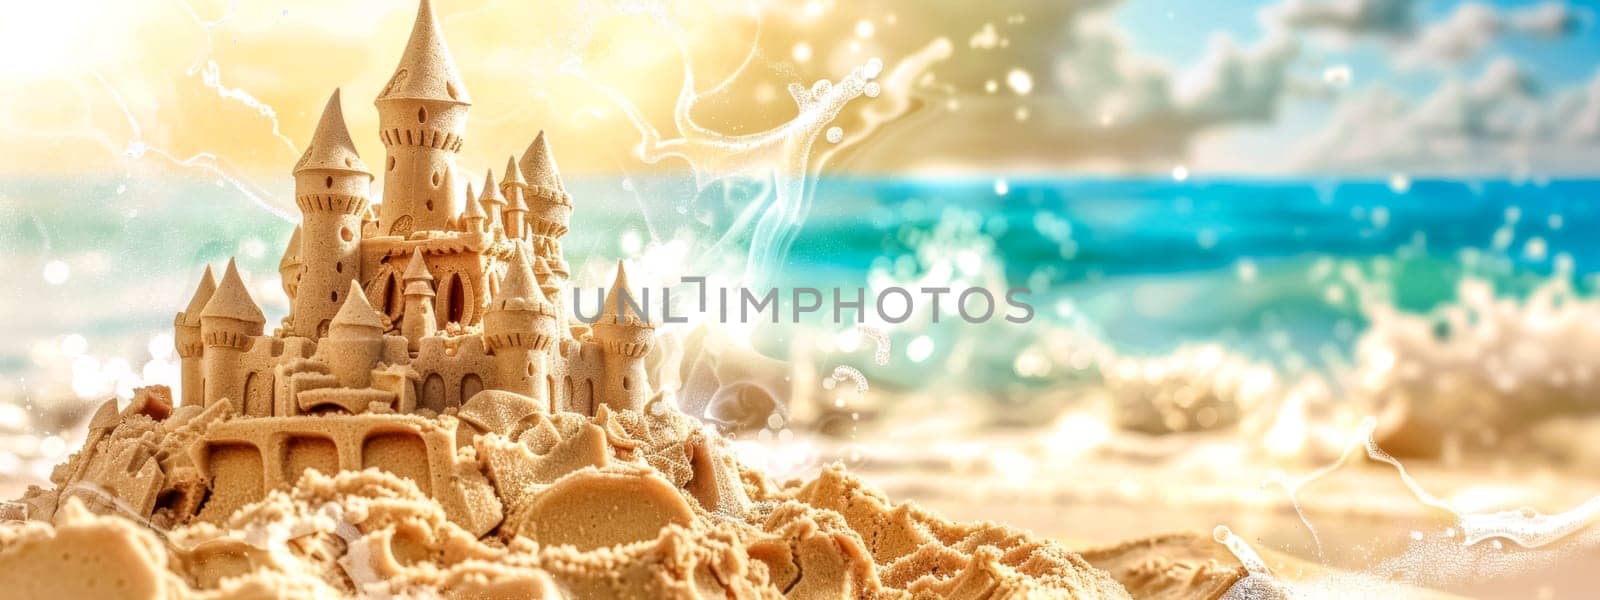 Intricate sand castle with towers and arches on a shimmering beach backdrop